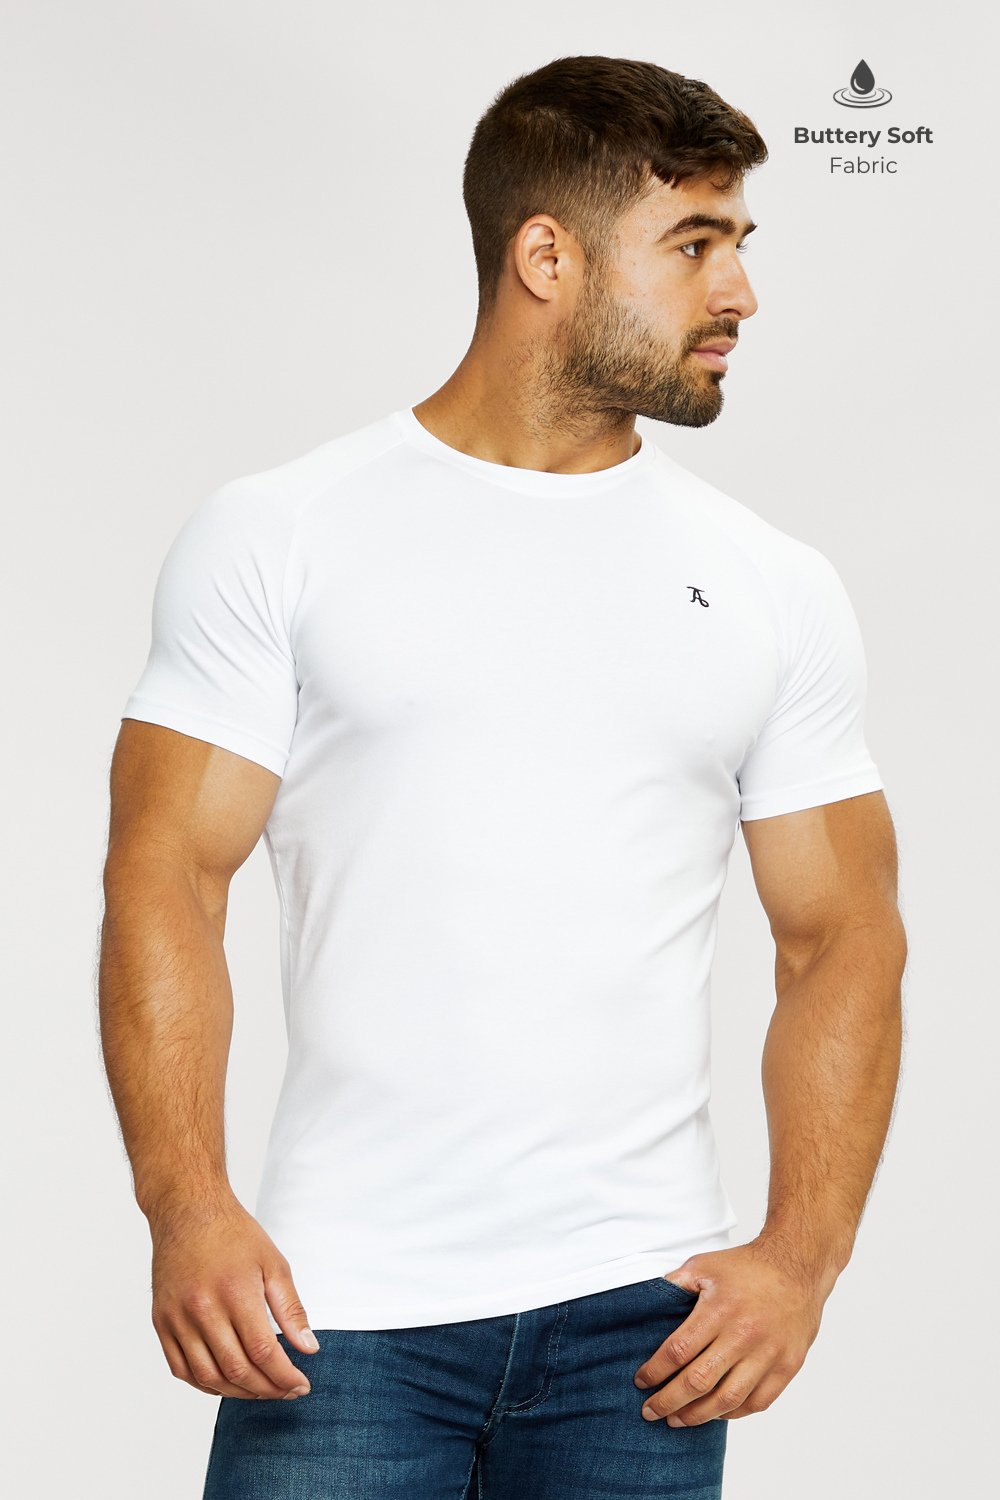 Premium Muscle Fit T-Shirt in White - TAILORED ATHLETE - ROW